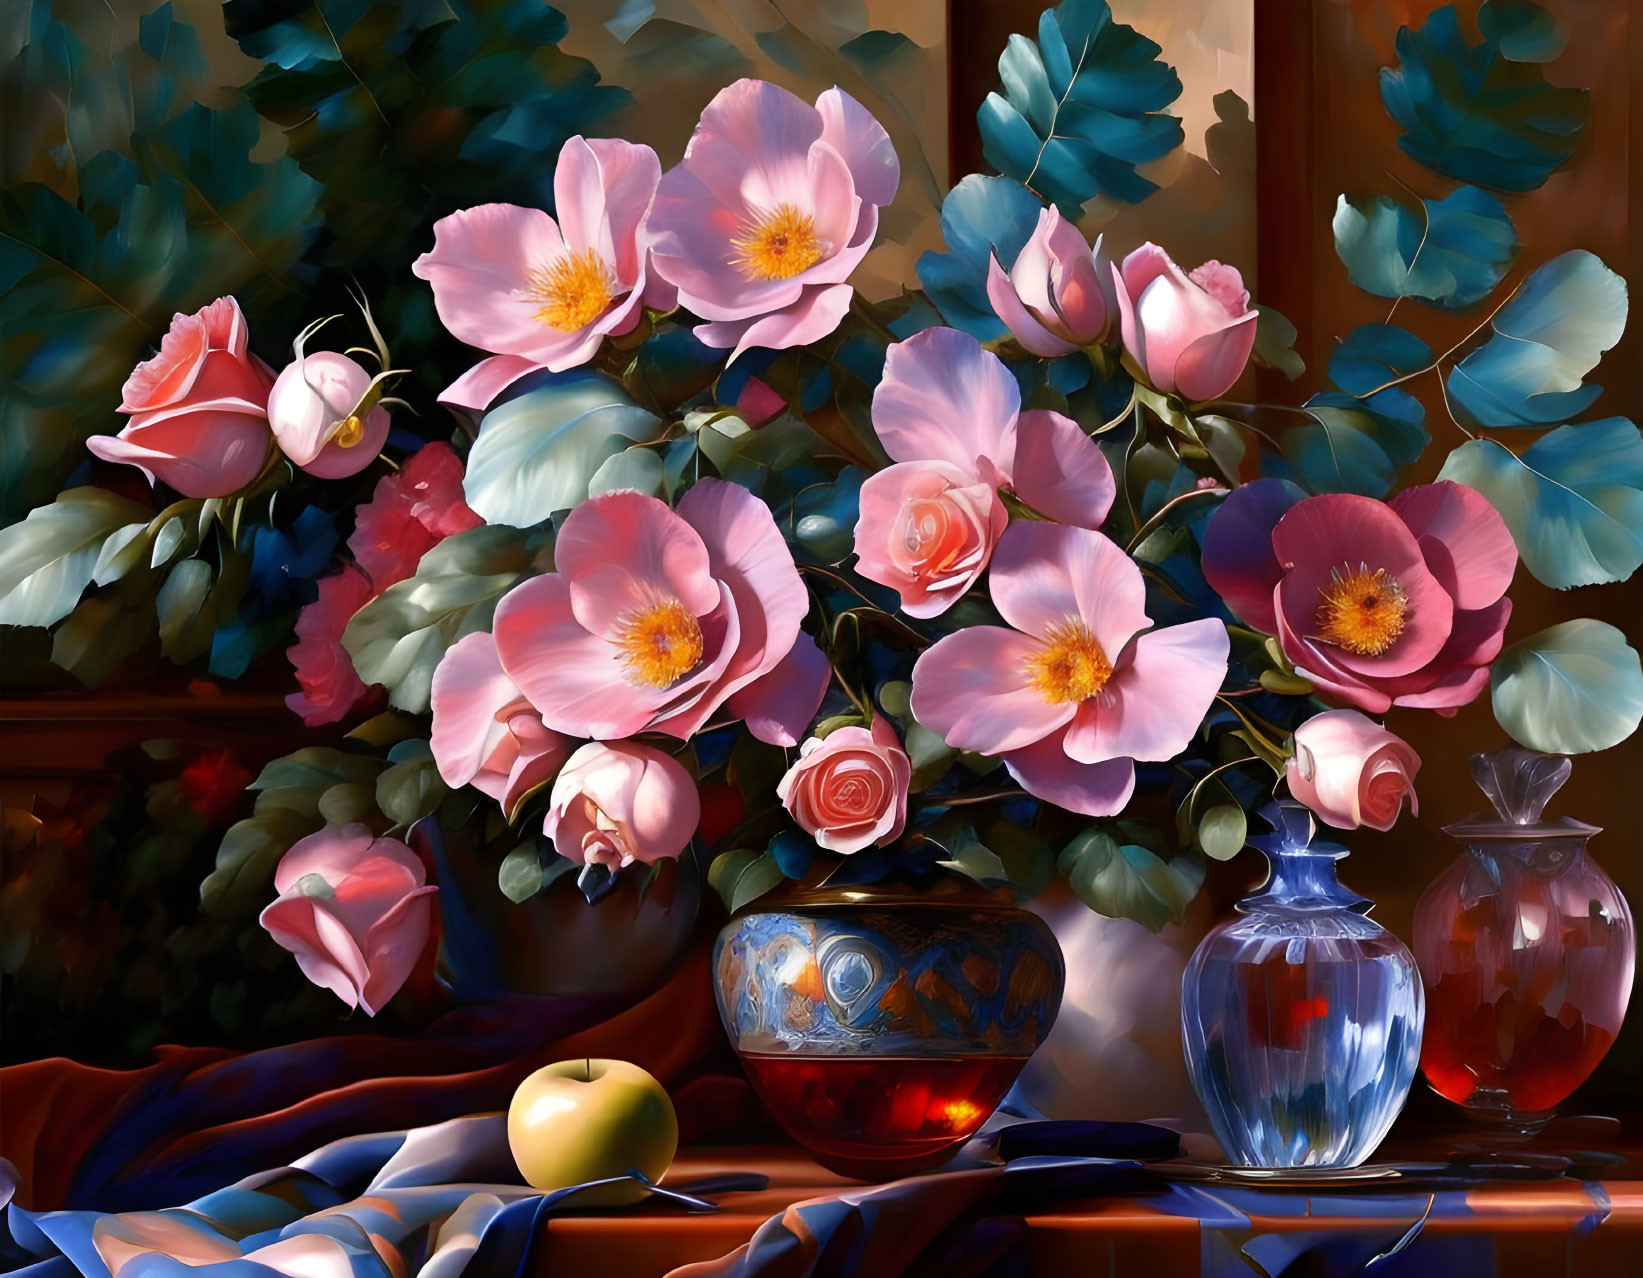 Colorful still life with pink roses, vases, glass jar, blue cloth, and apple.